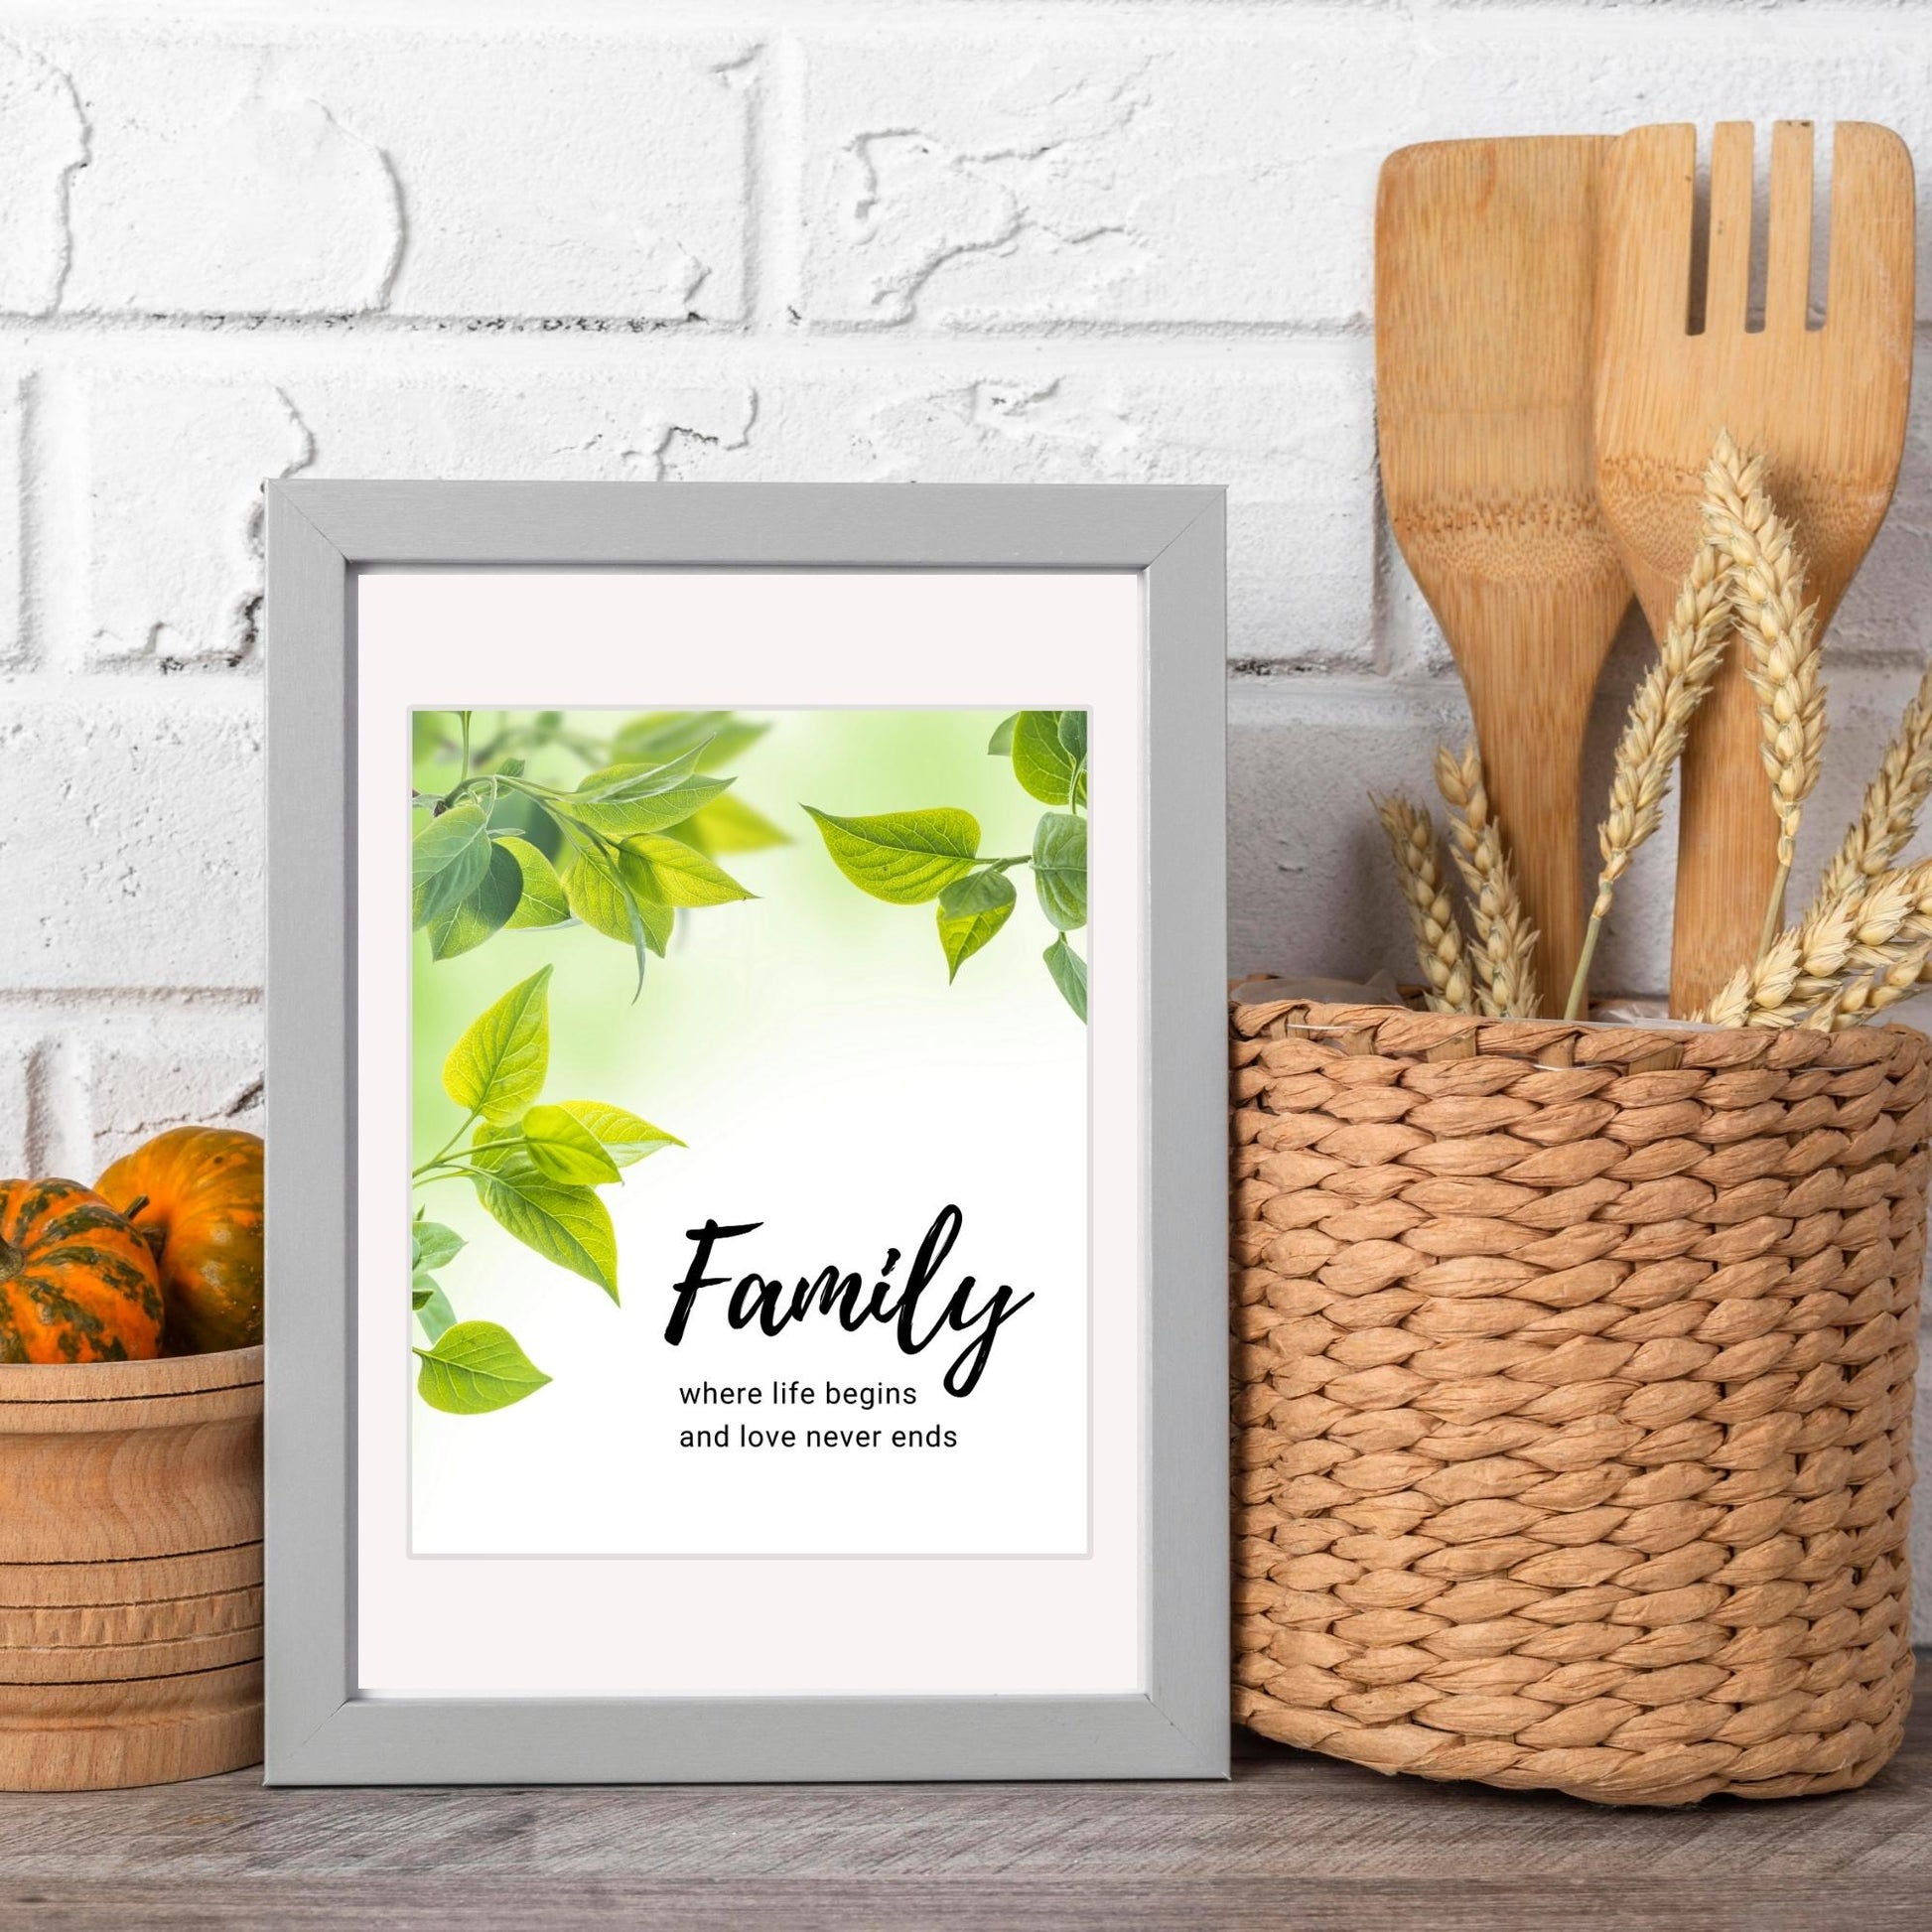 Inspirational Word Art - Family, where life begins and love never ends - Green Leaves Wall Decor (8x10 print) | shown in light grey frame on kitchen counter with white brick backsplash | oak7west.com